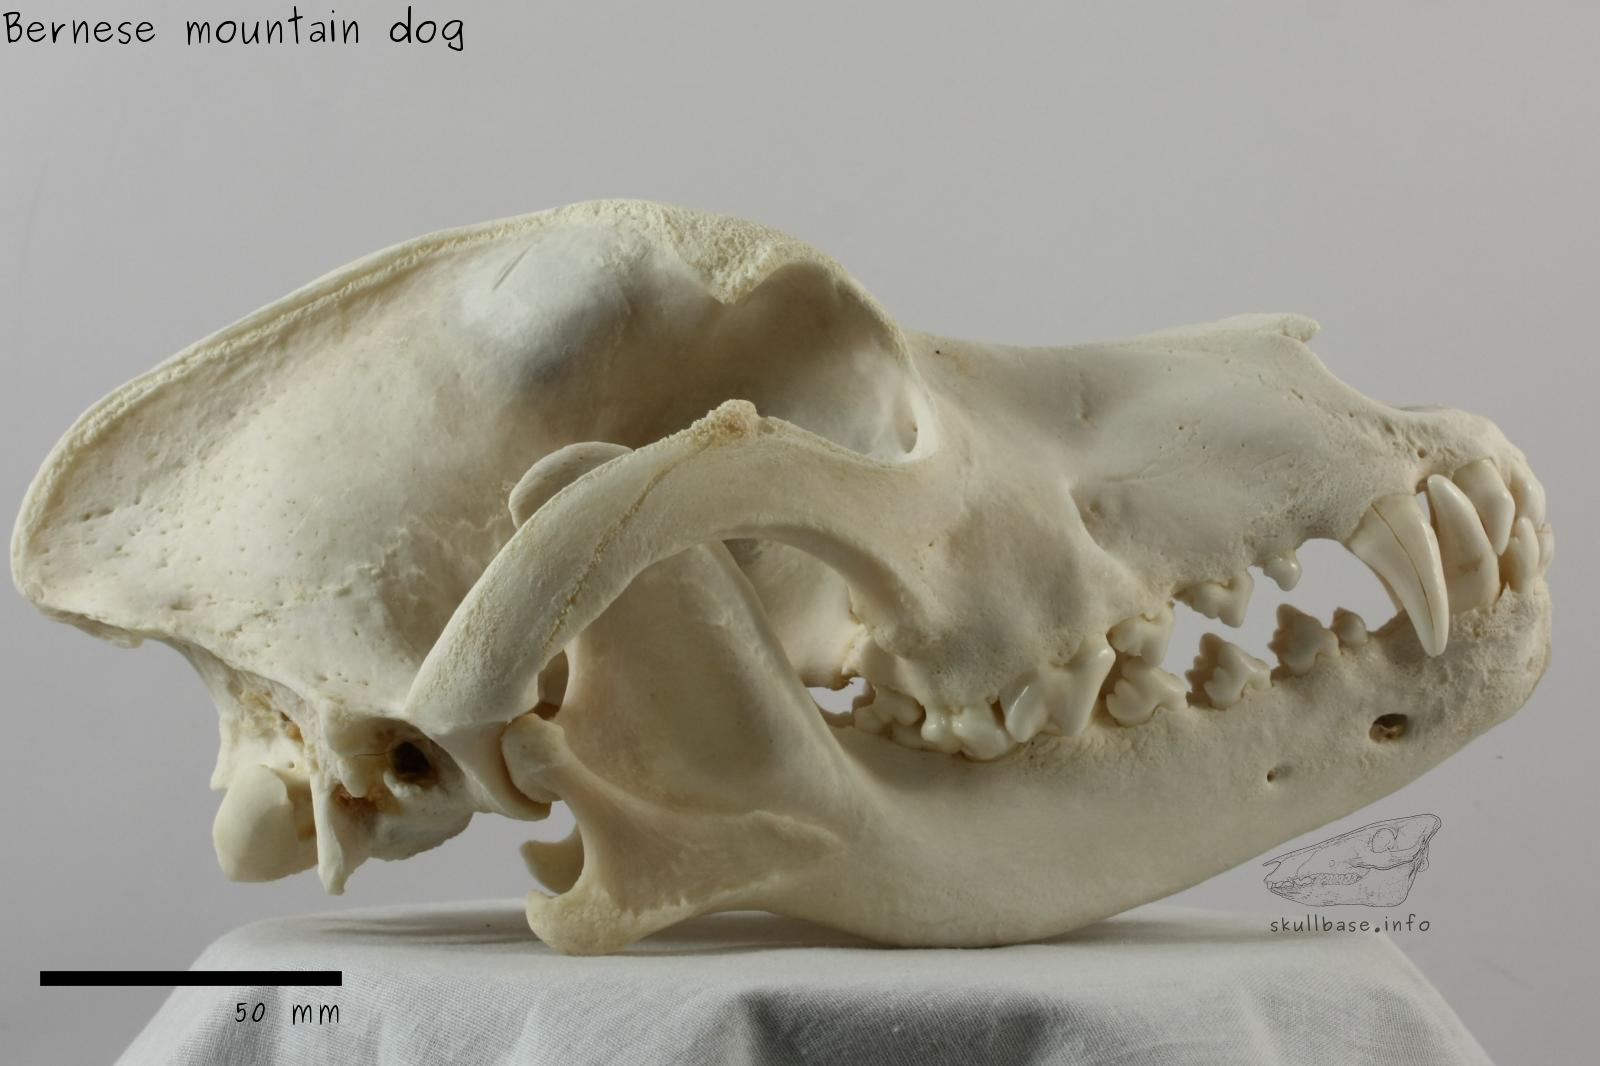 Bernese mountain dog (Canis lupus familiaris) skull lateral view